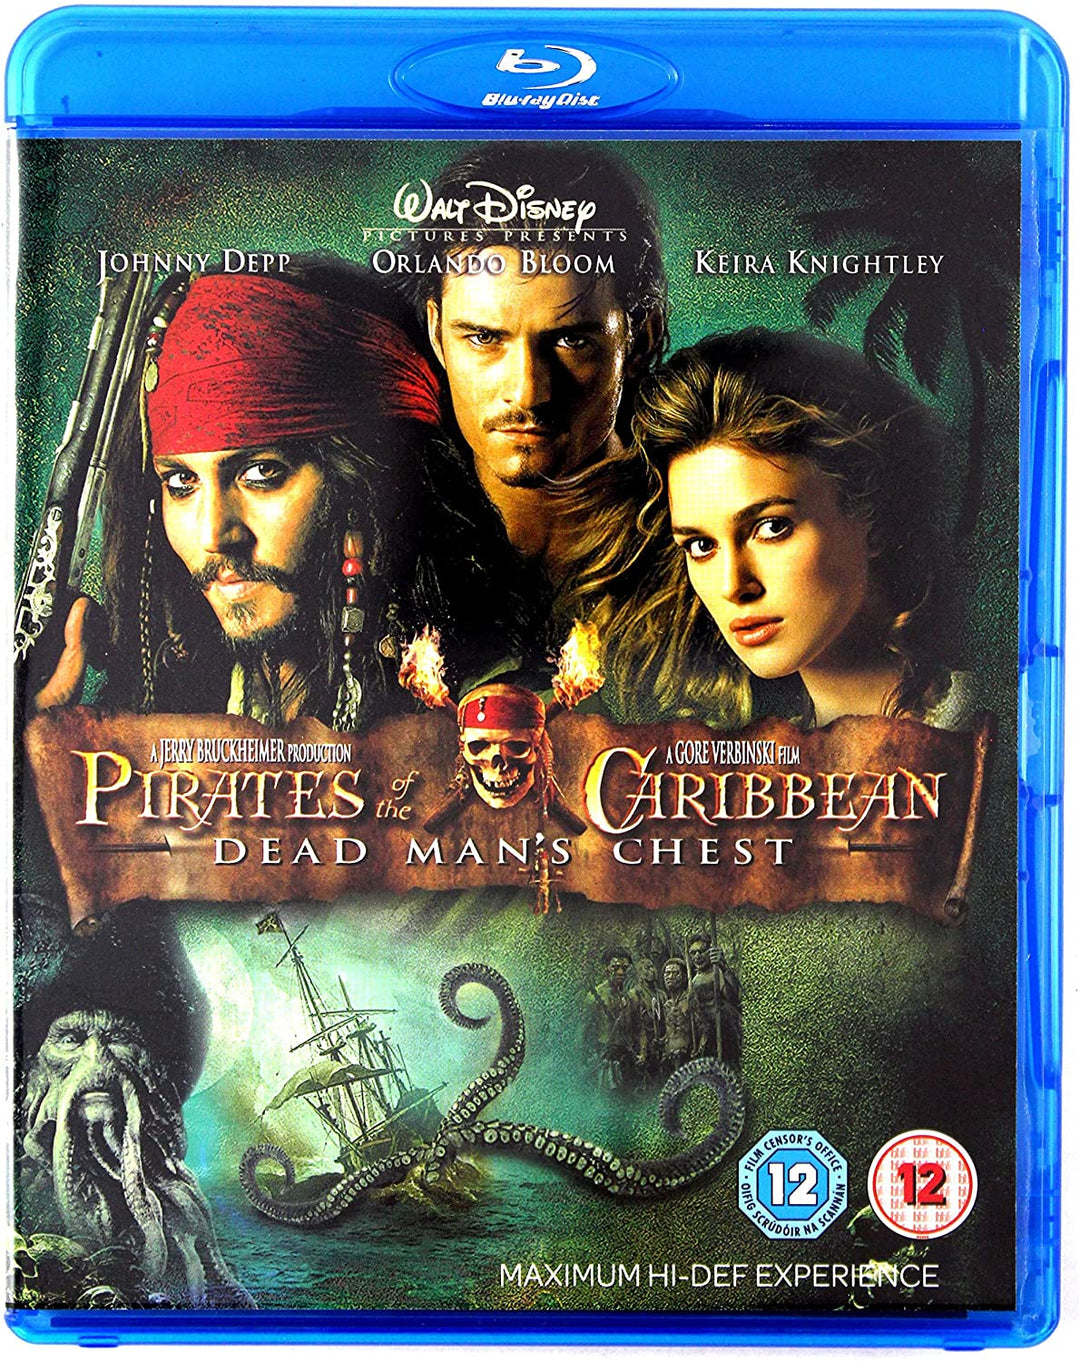 Pirates Of The Caribbean: Dead Man's Chest [Blu-ray] [2017] [Region Free]